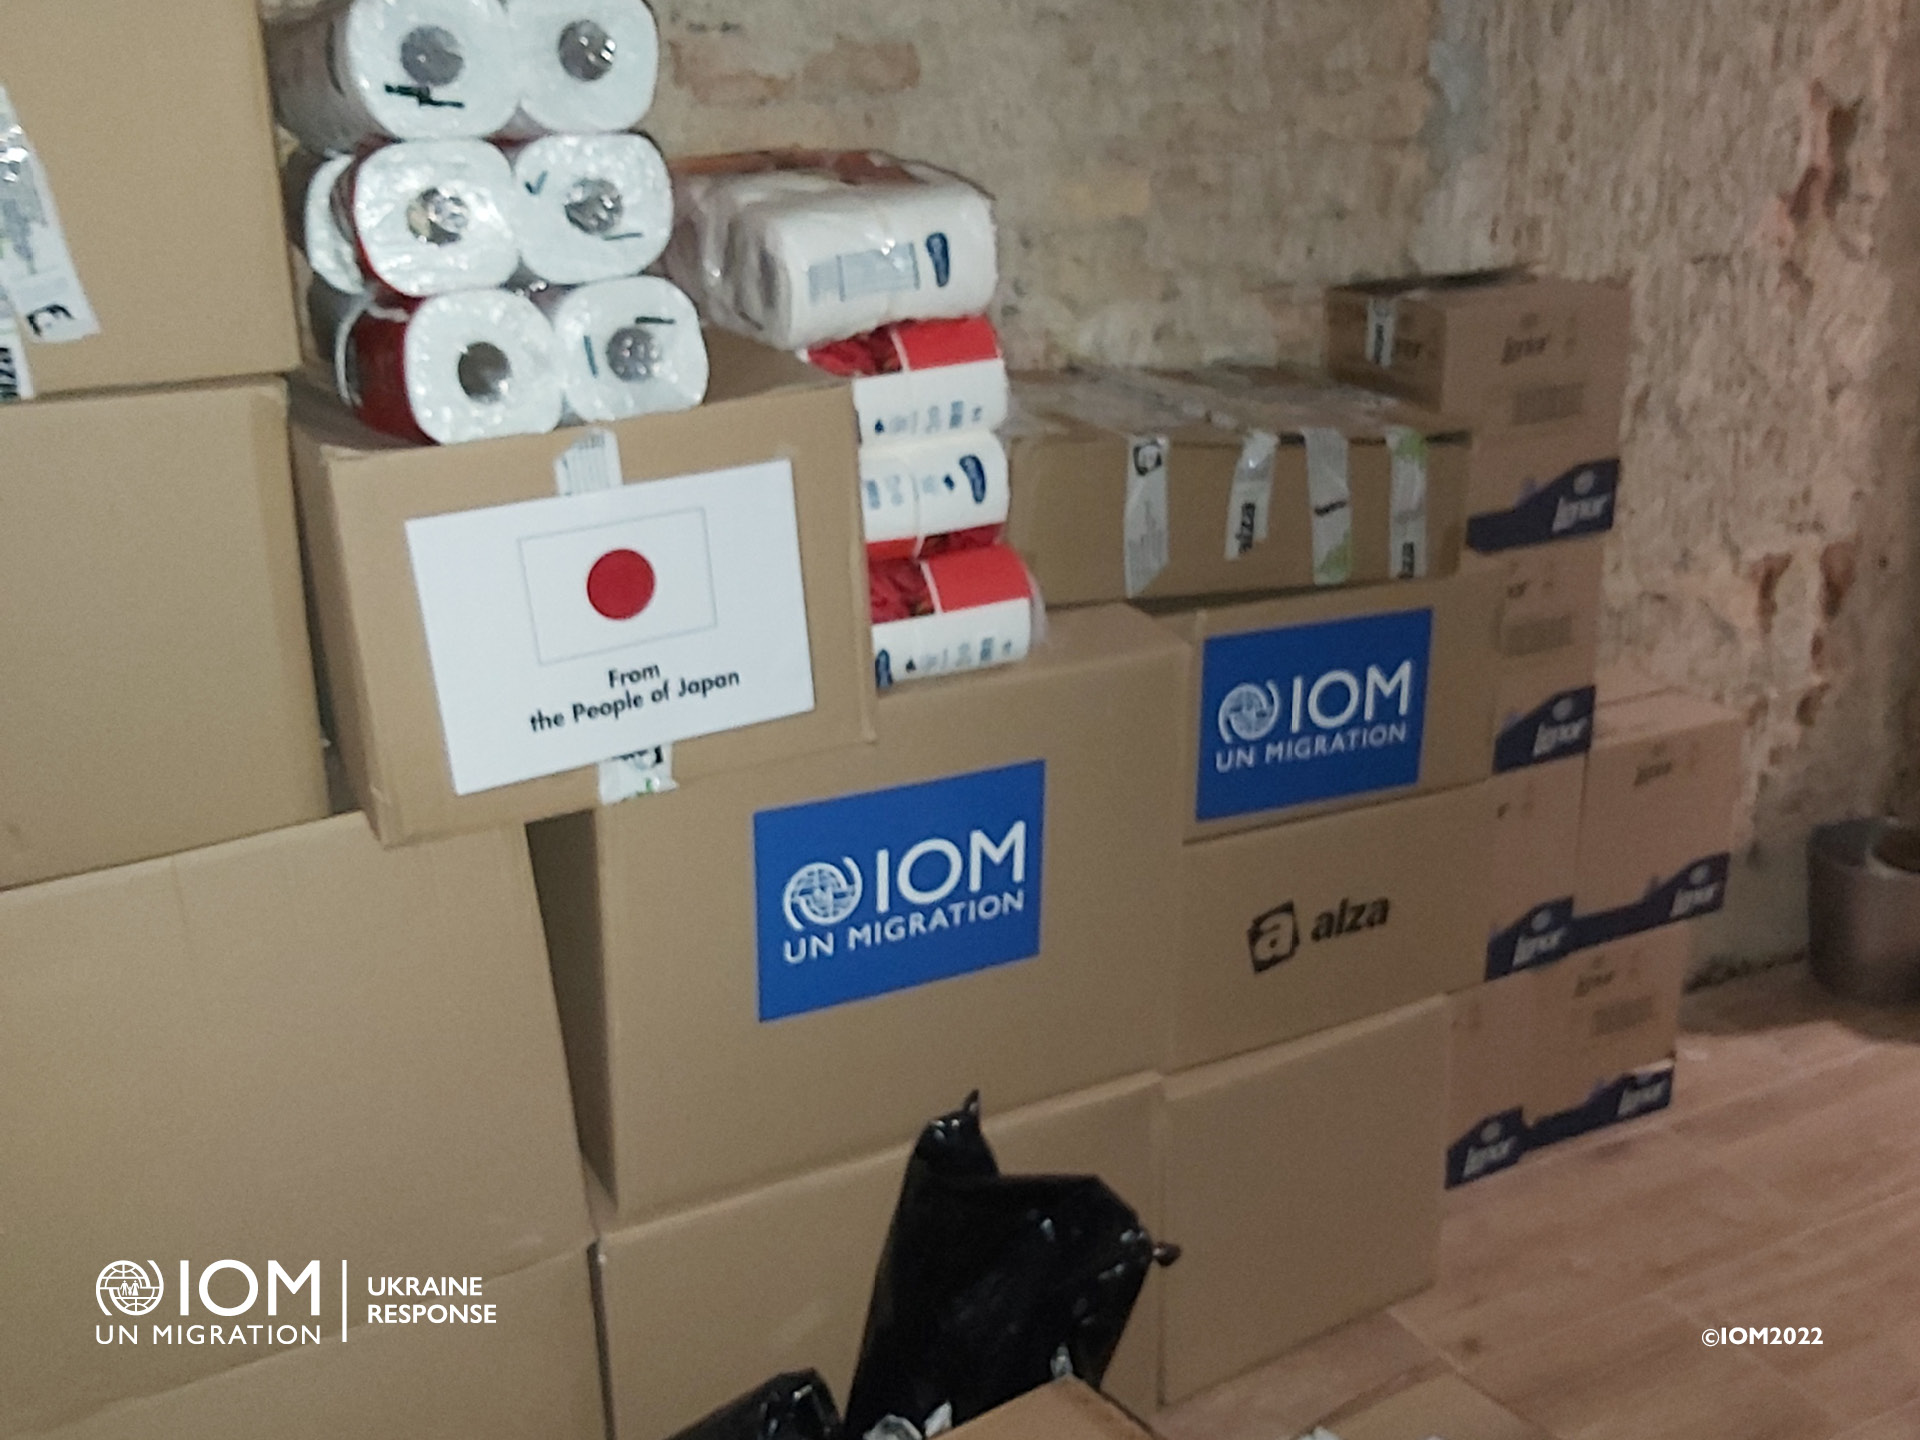 IOM humanitarian aid delivery to the BUBO Asylum House in Bratislava. Photo © International Organization for Migration (IOM) 2022.